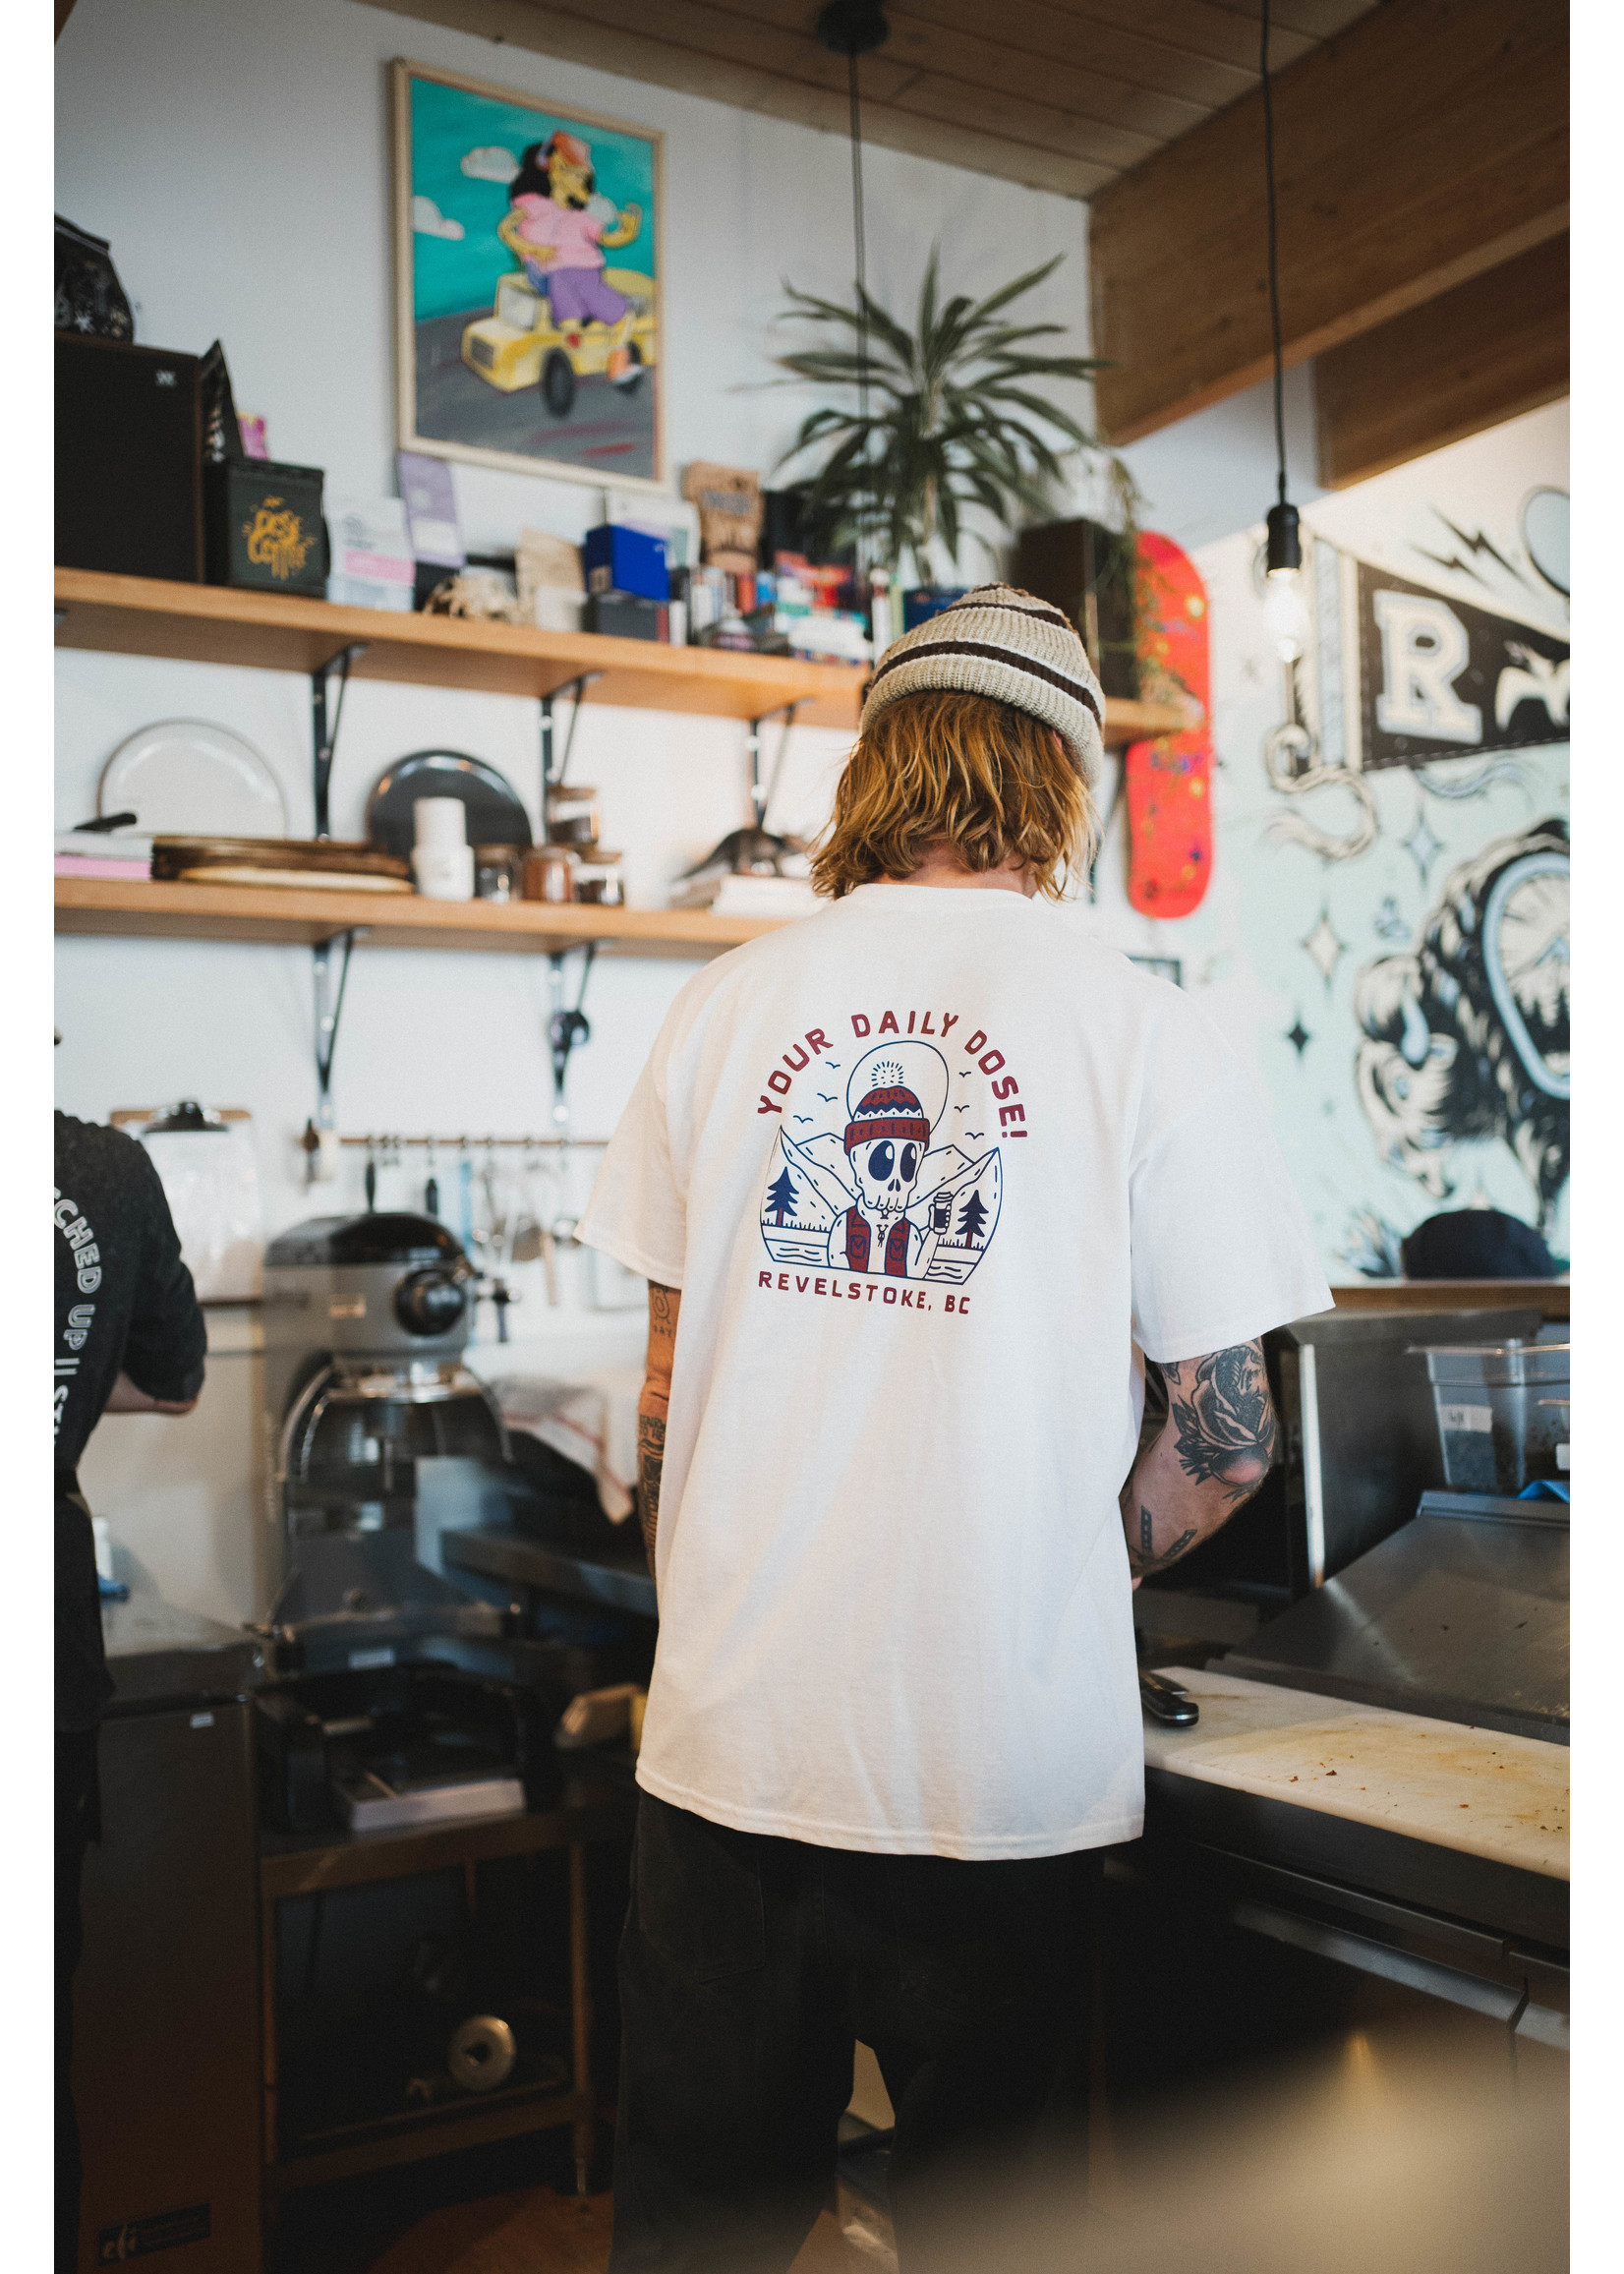 Trading Co. Revelstoke - Daily Dose Tee